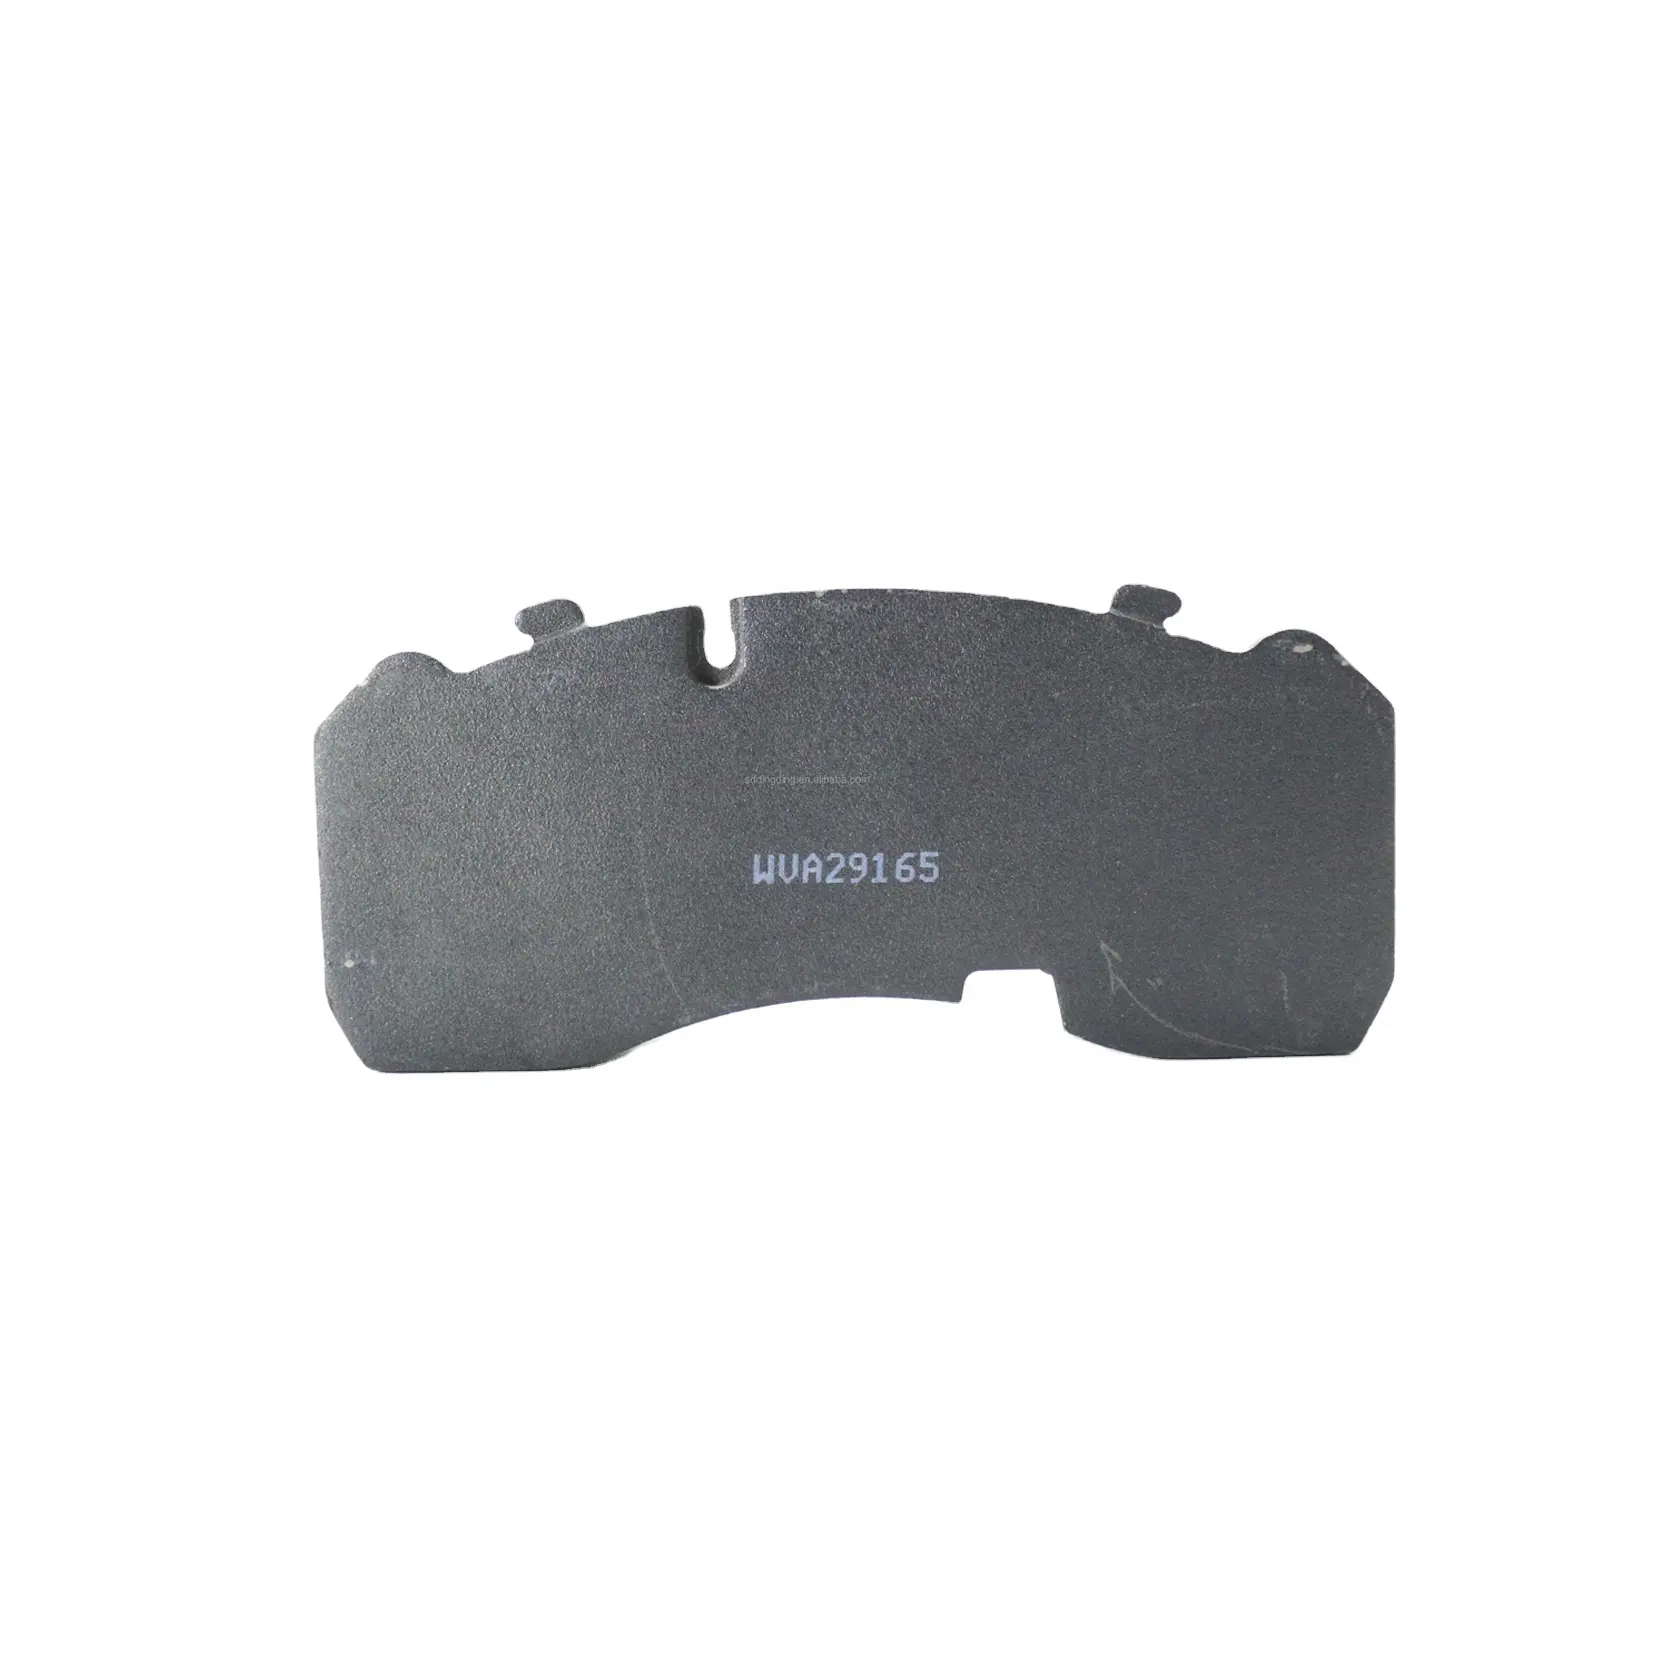 Hot Sales Truck brake pad 29165 Heavy Duty Truck for Factory Manufacturer 29174 29059 From China Supplier